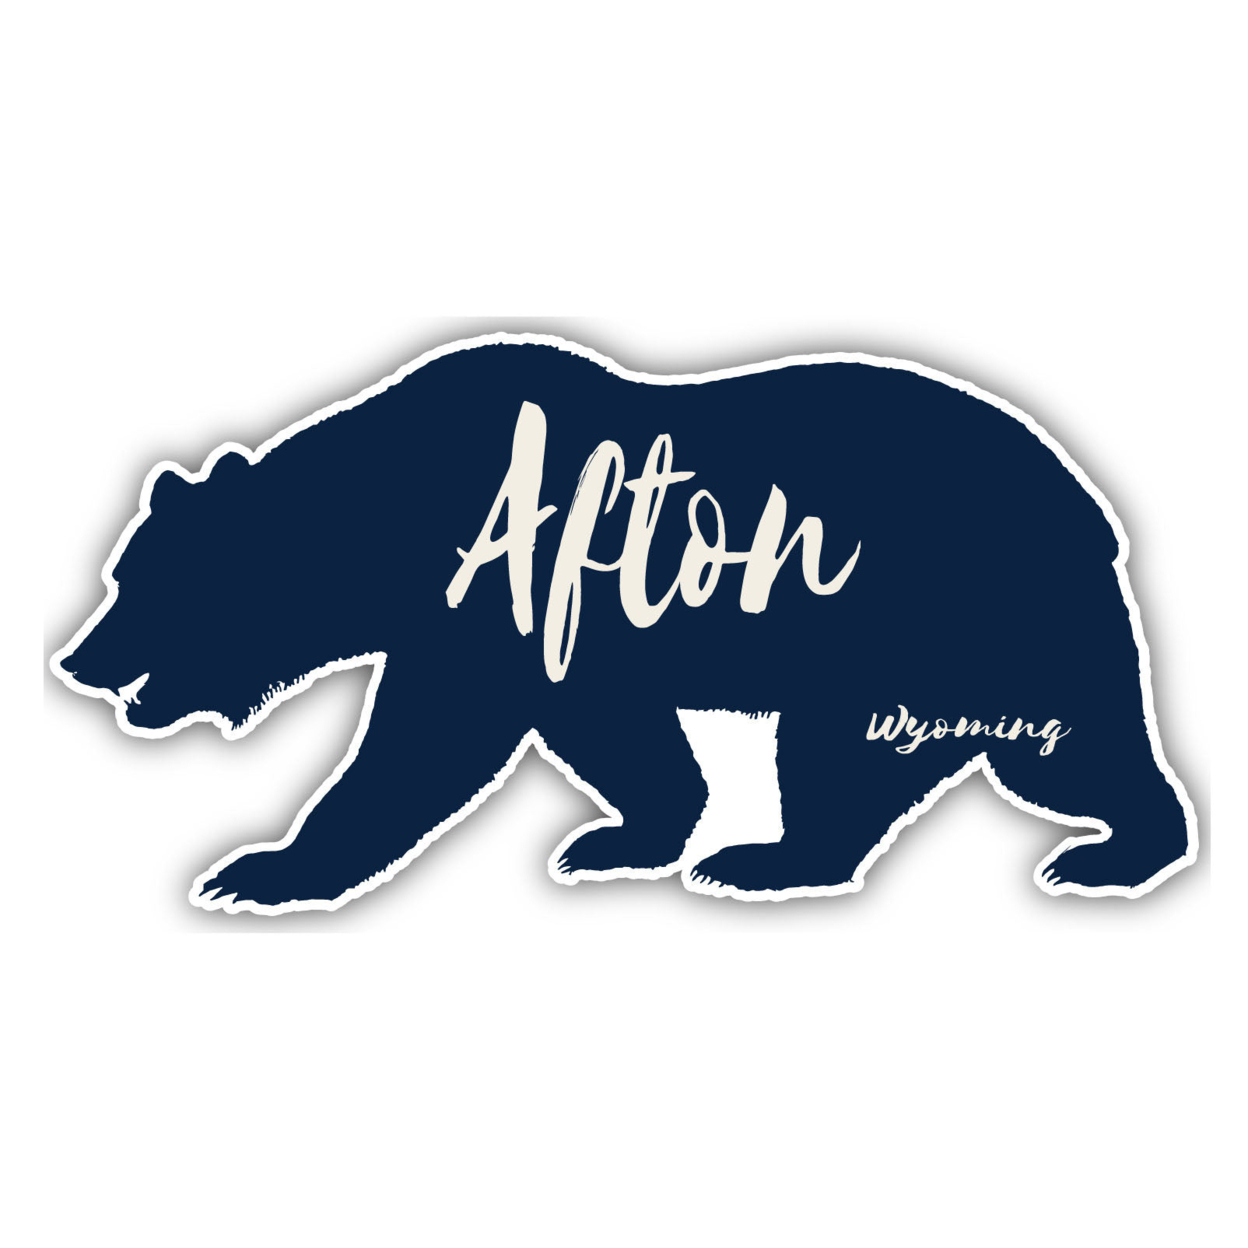 Afton Wyoming Souvenir Decorative Stickers (Choose Theme And Size) - 4-Pack, 4-Inch, Bear